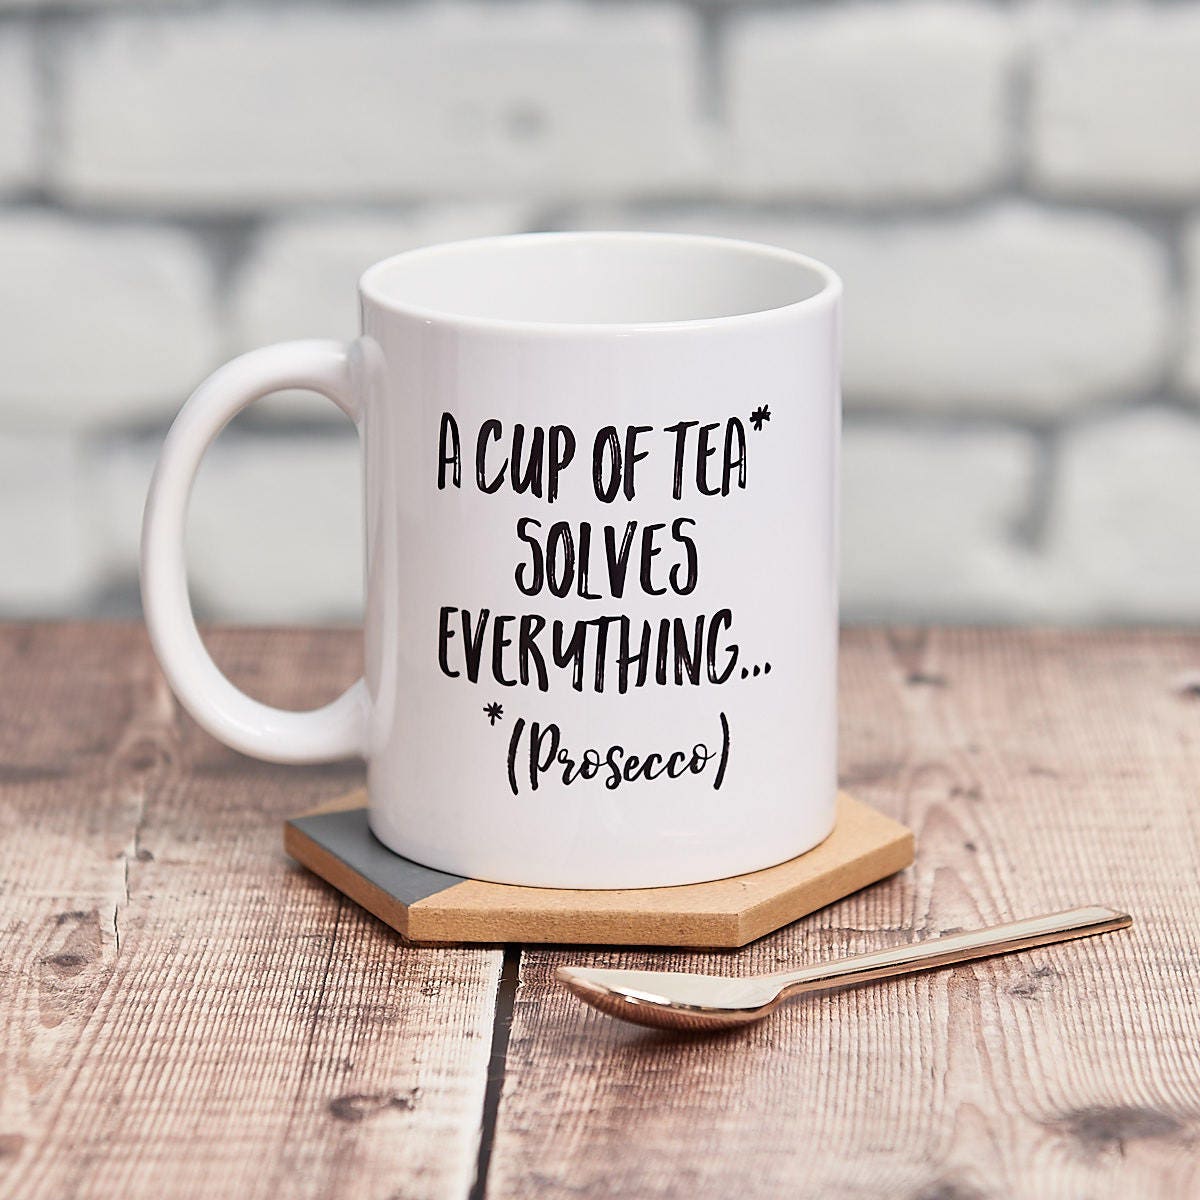 A cup of tea can solve anything